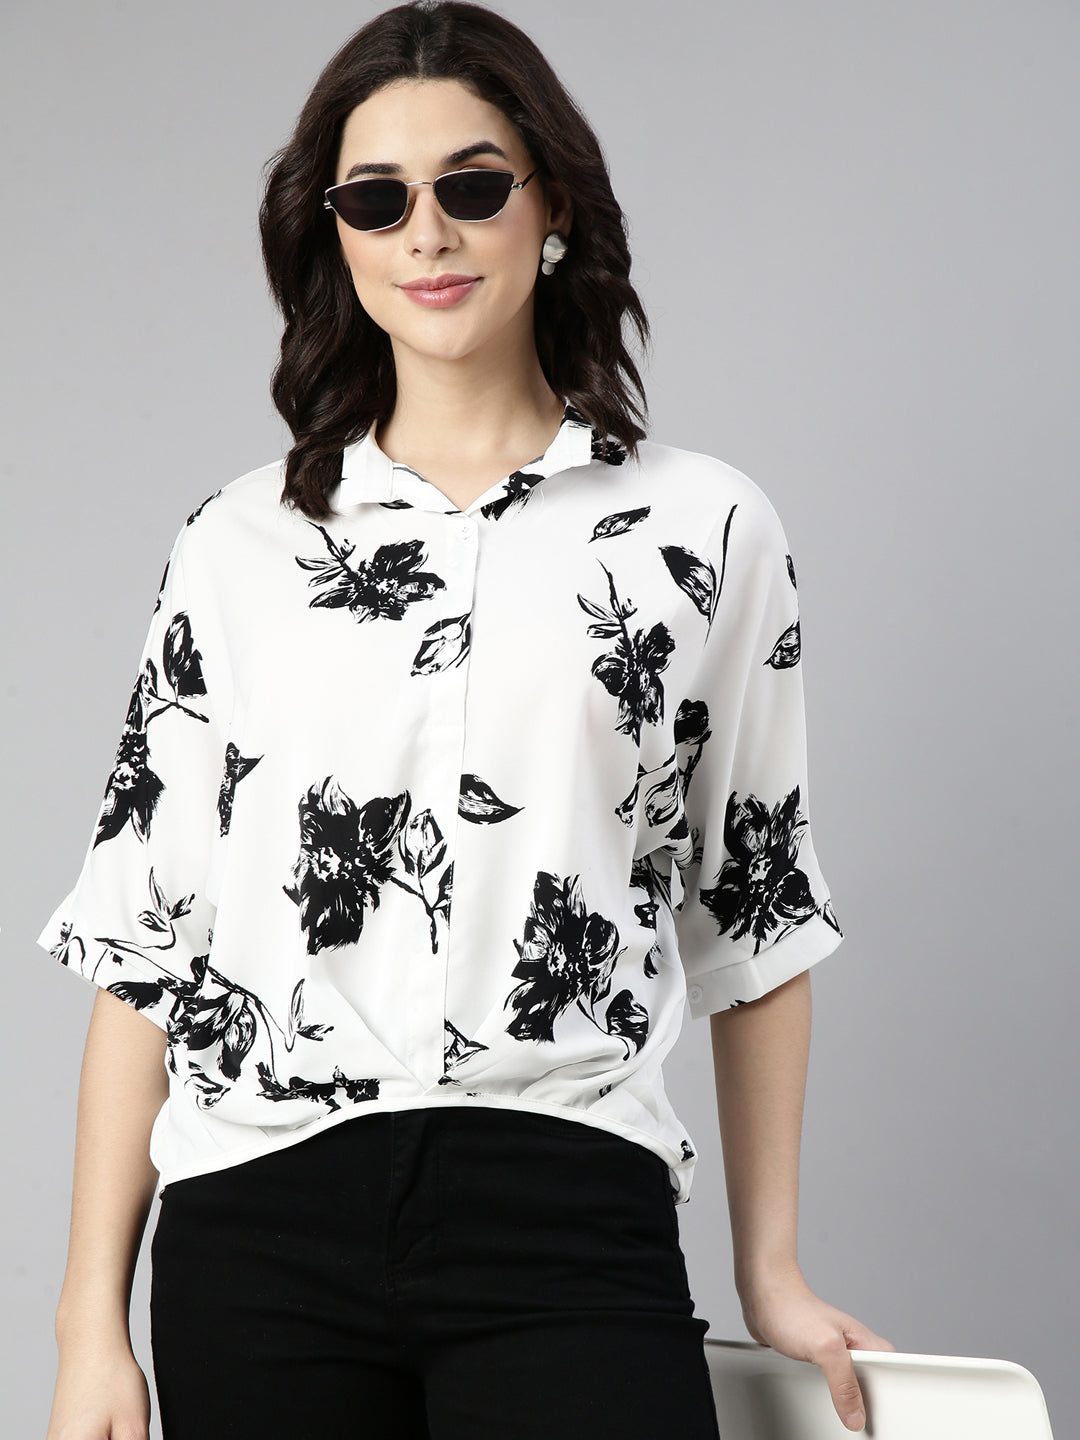 Women Floral Shirt Style White Over Sized Top